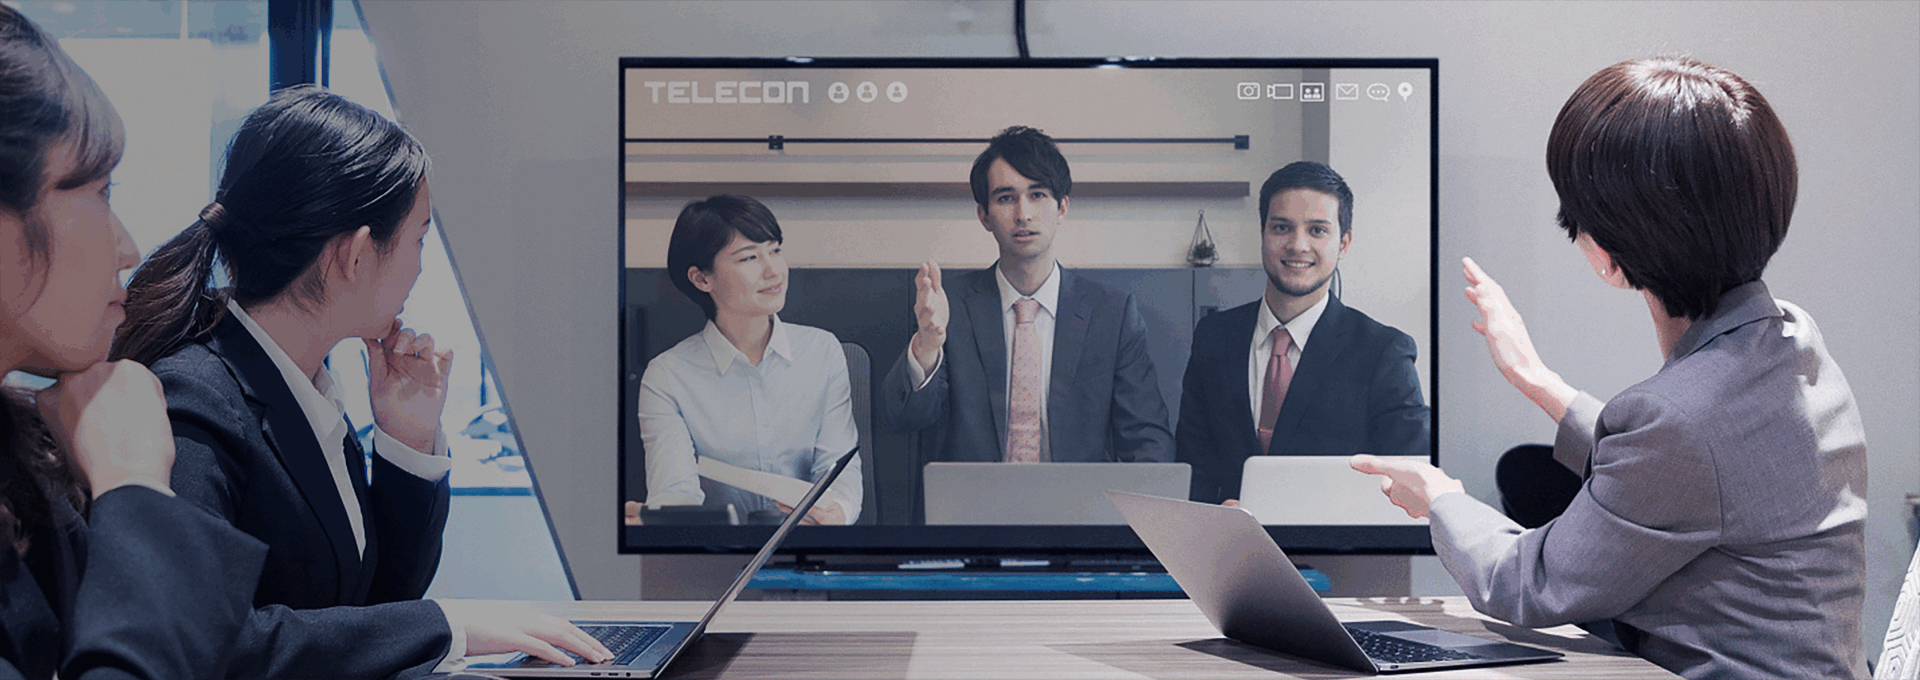 Video Conference Live Streaming插图